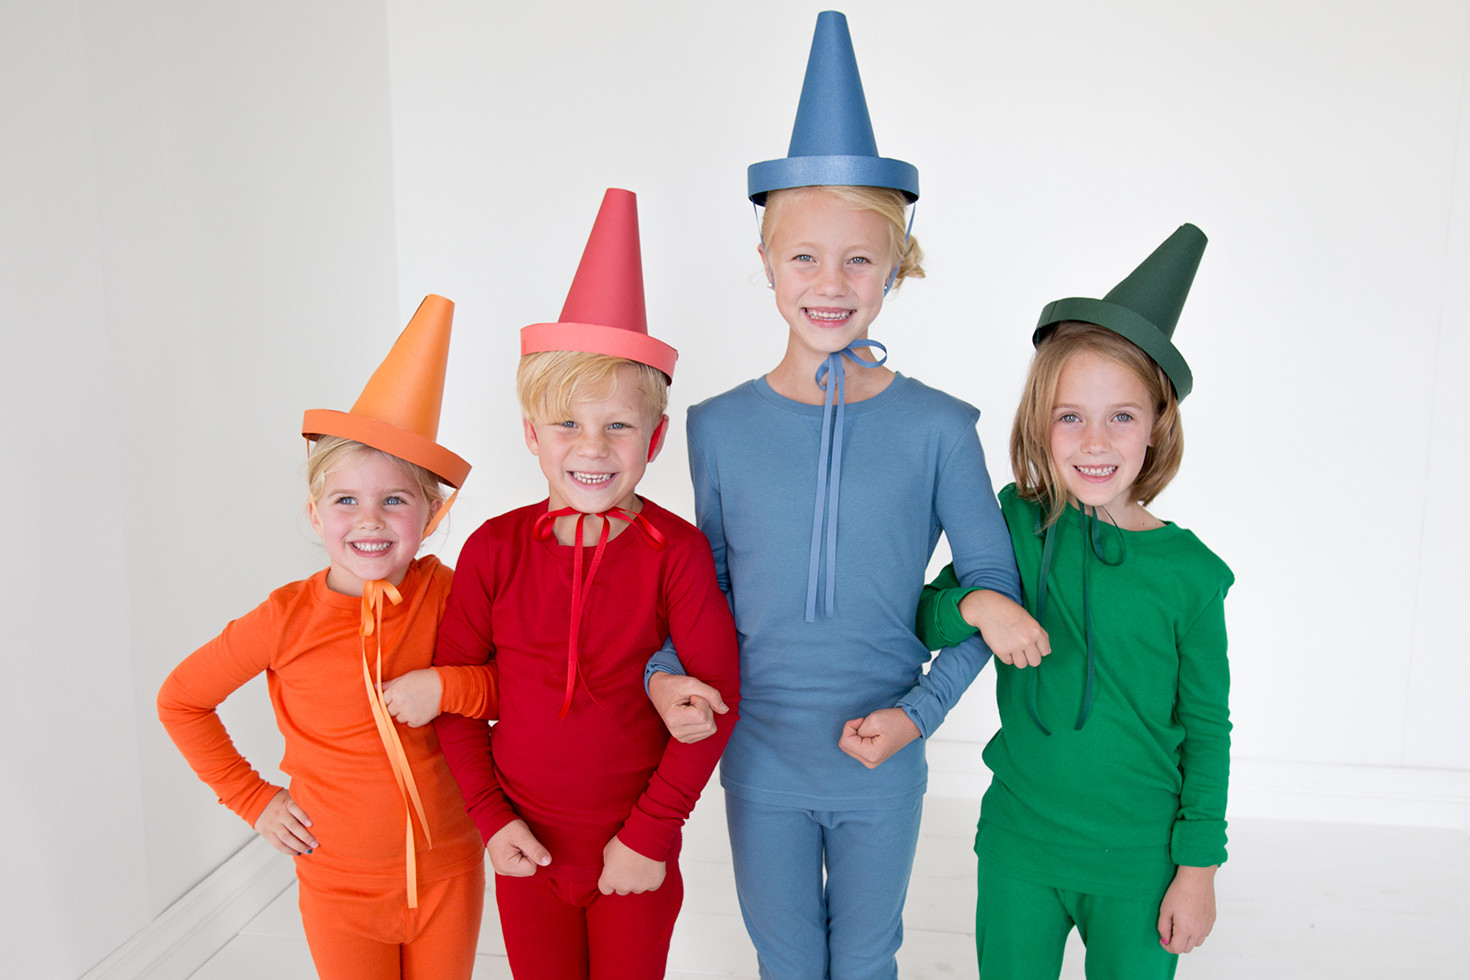 DIY Crayon Costume
 The Day the Crayons Quit costumes